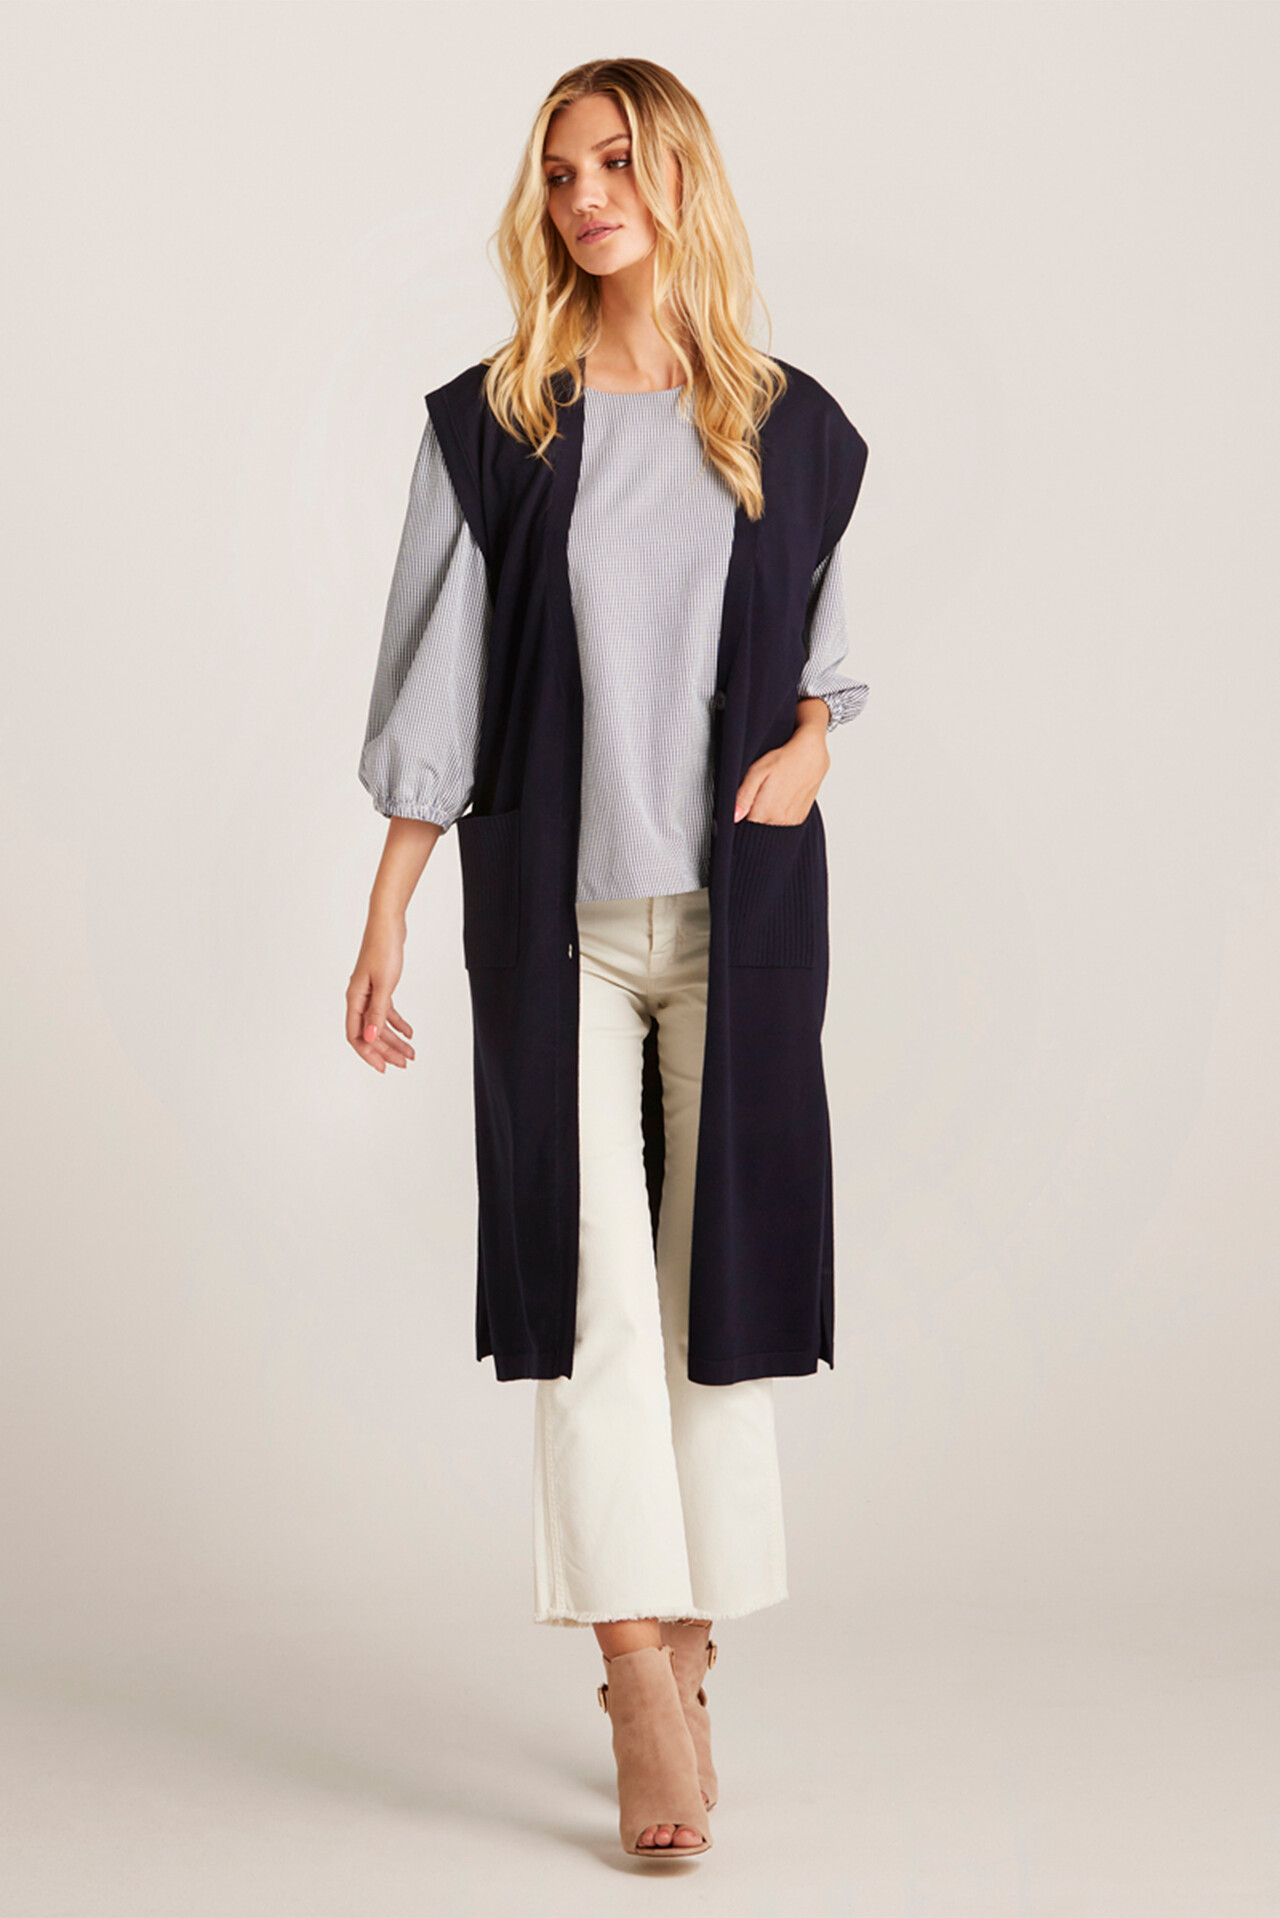 IN FRONT CAMILLE LONG KNIT VEST 14651 591 (Navy 591, M)